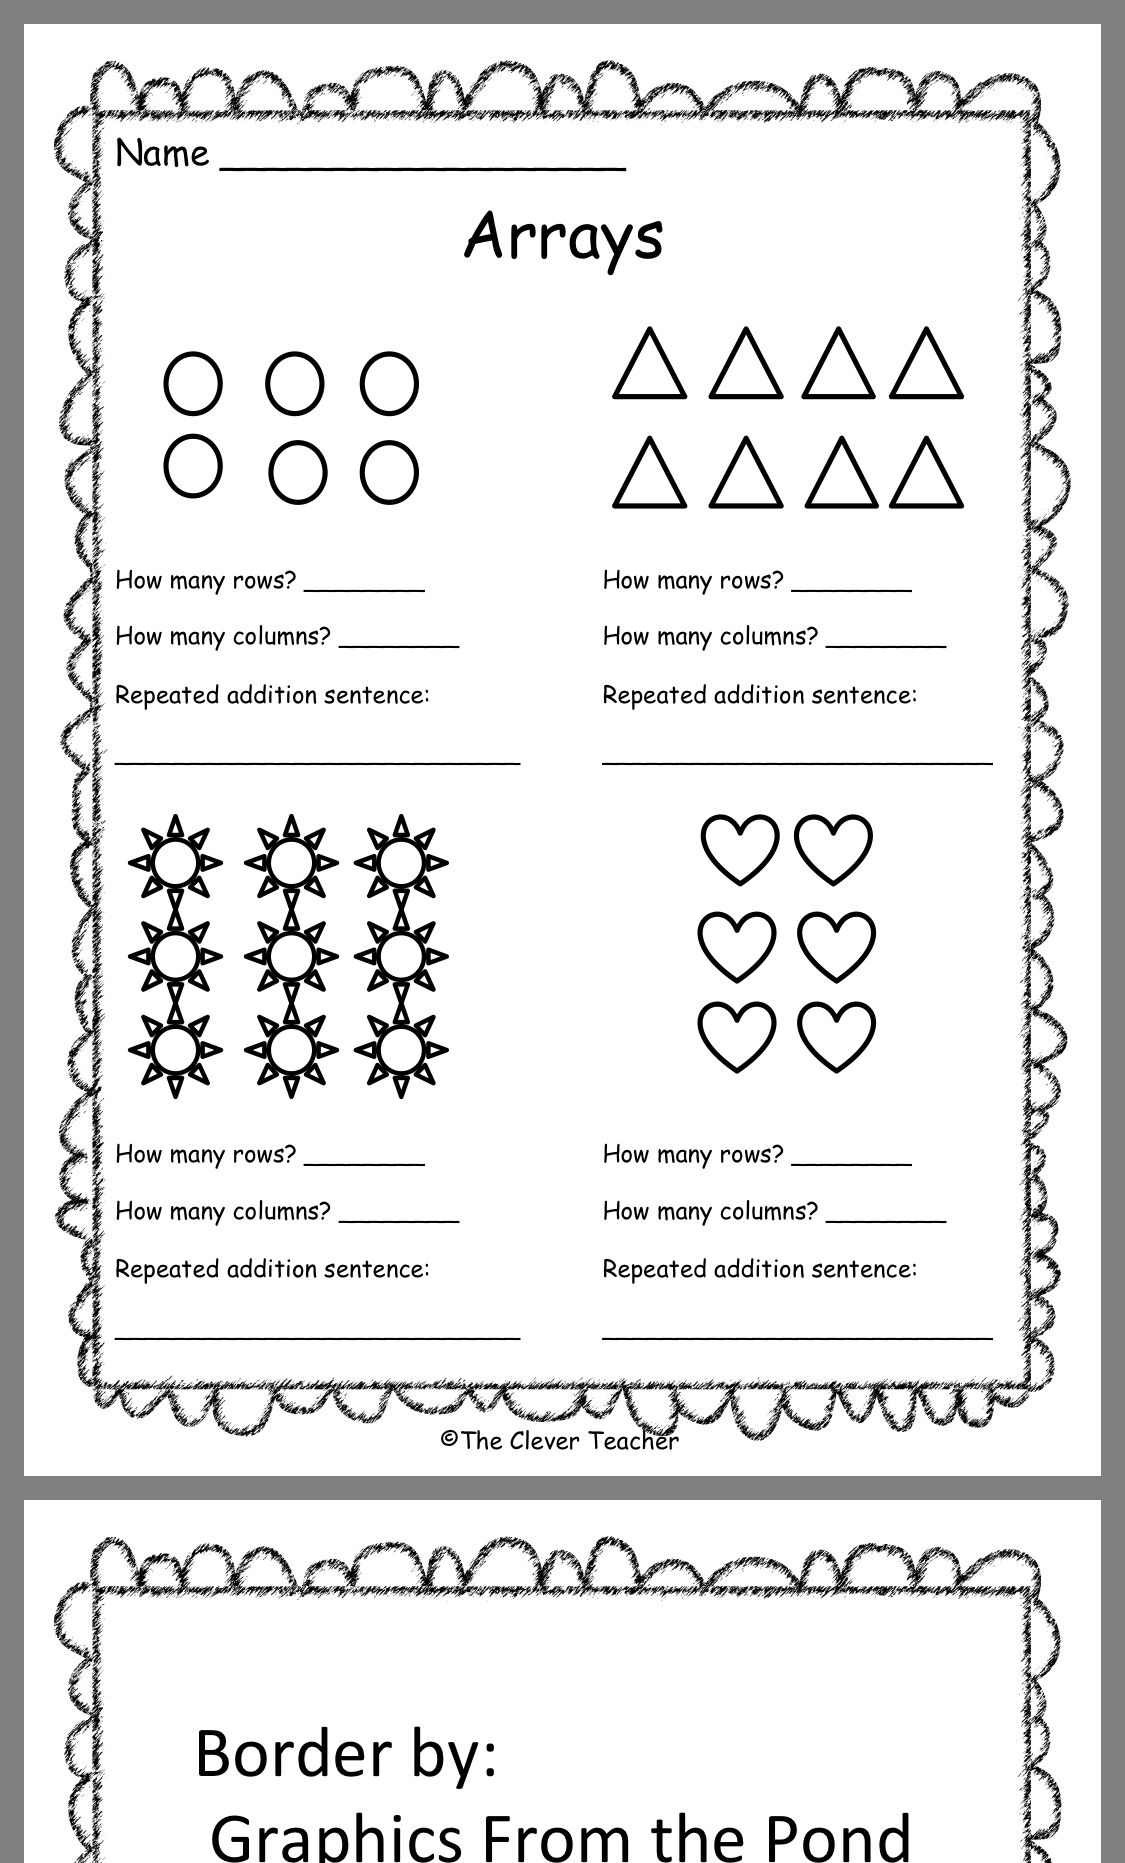 Pin By Kim Keogh On Second Grade Repeated Addition Second Grade